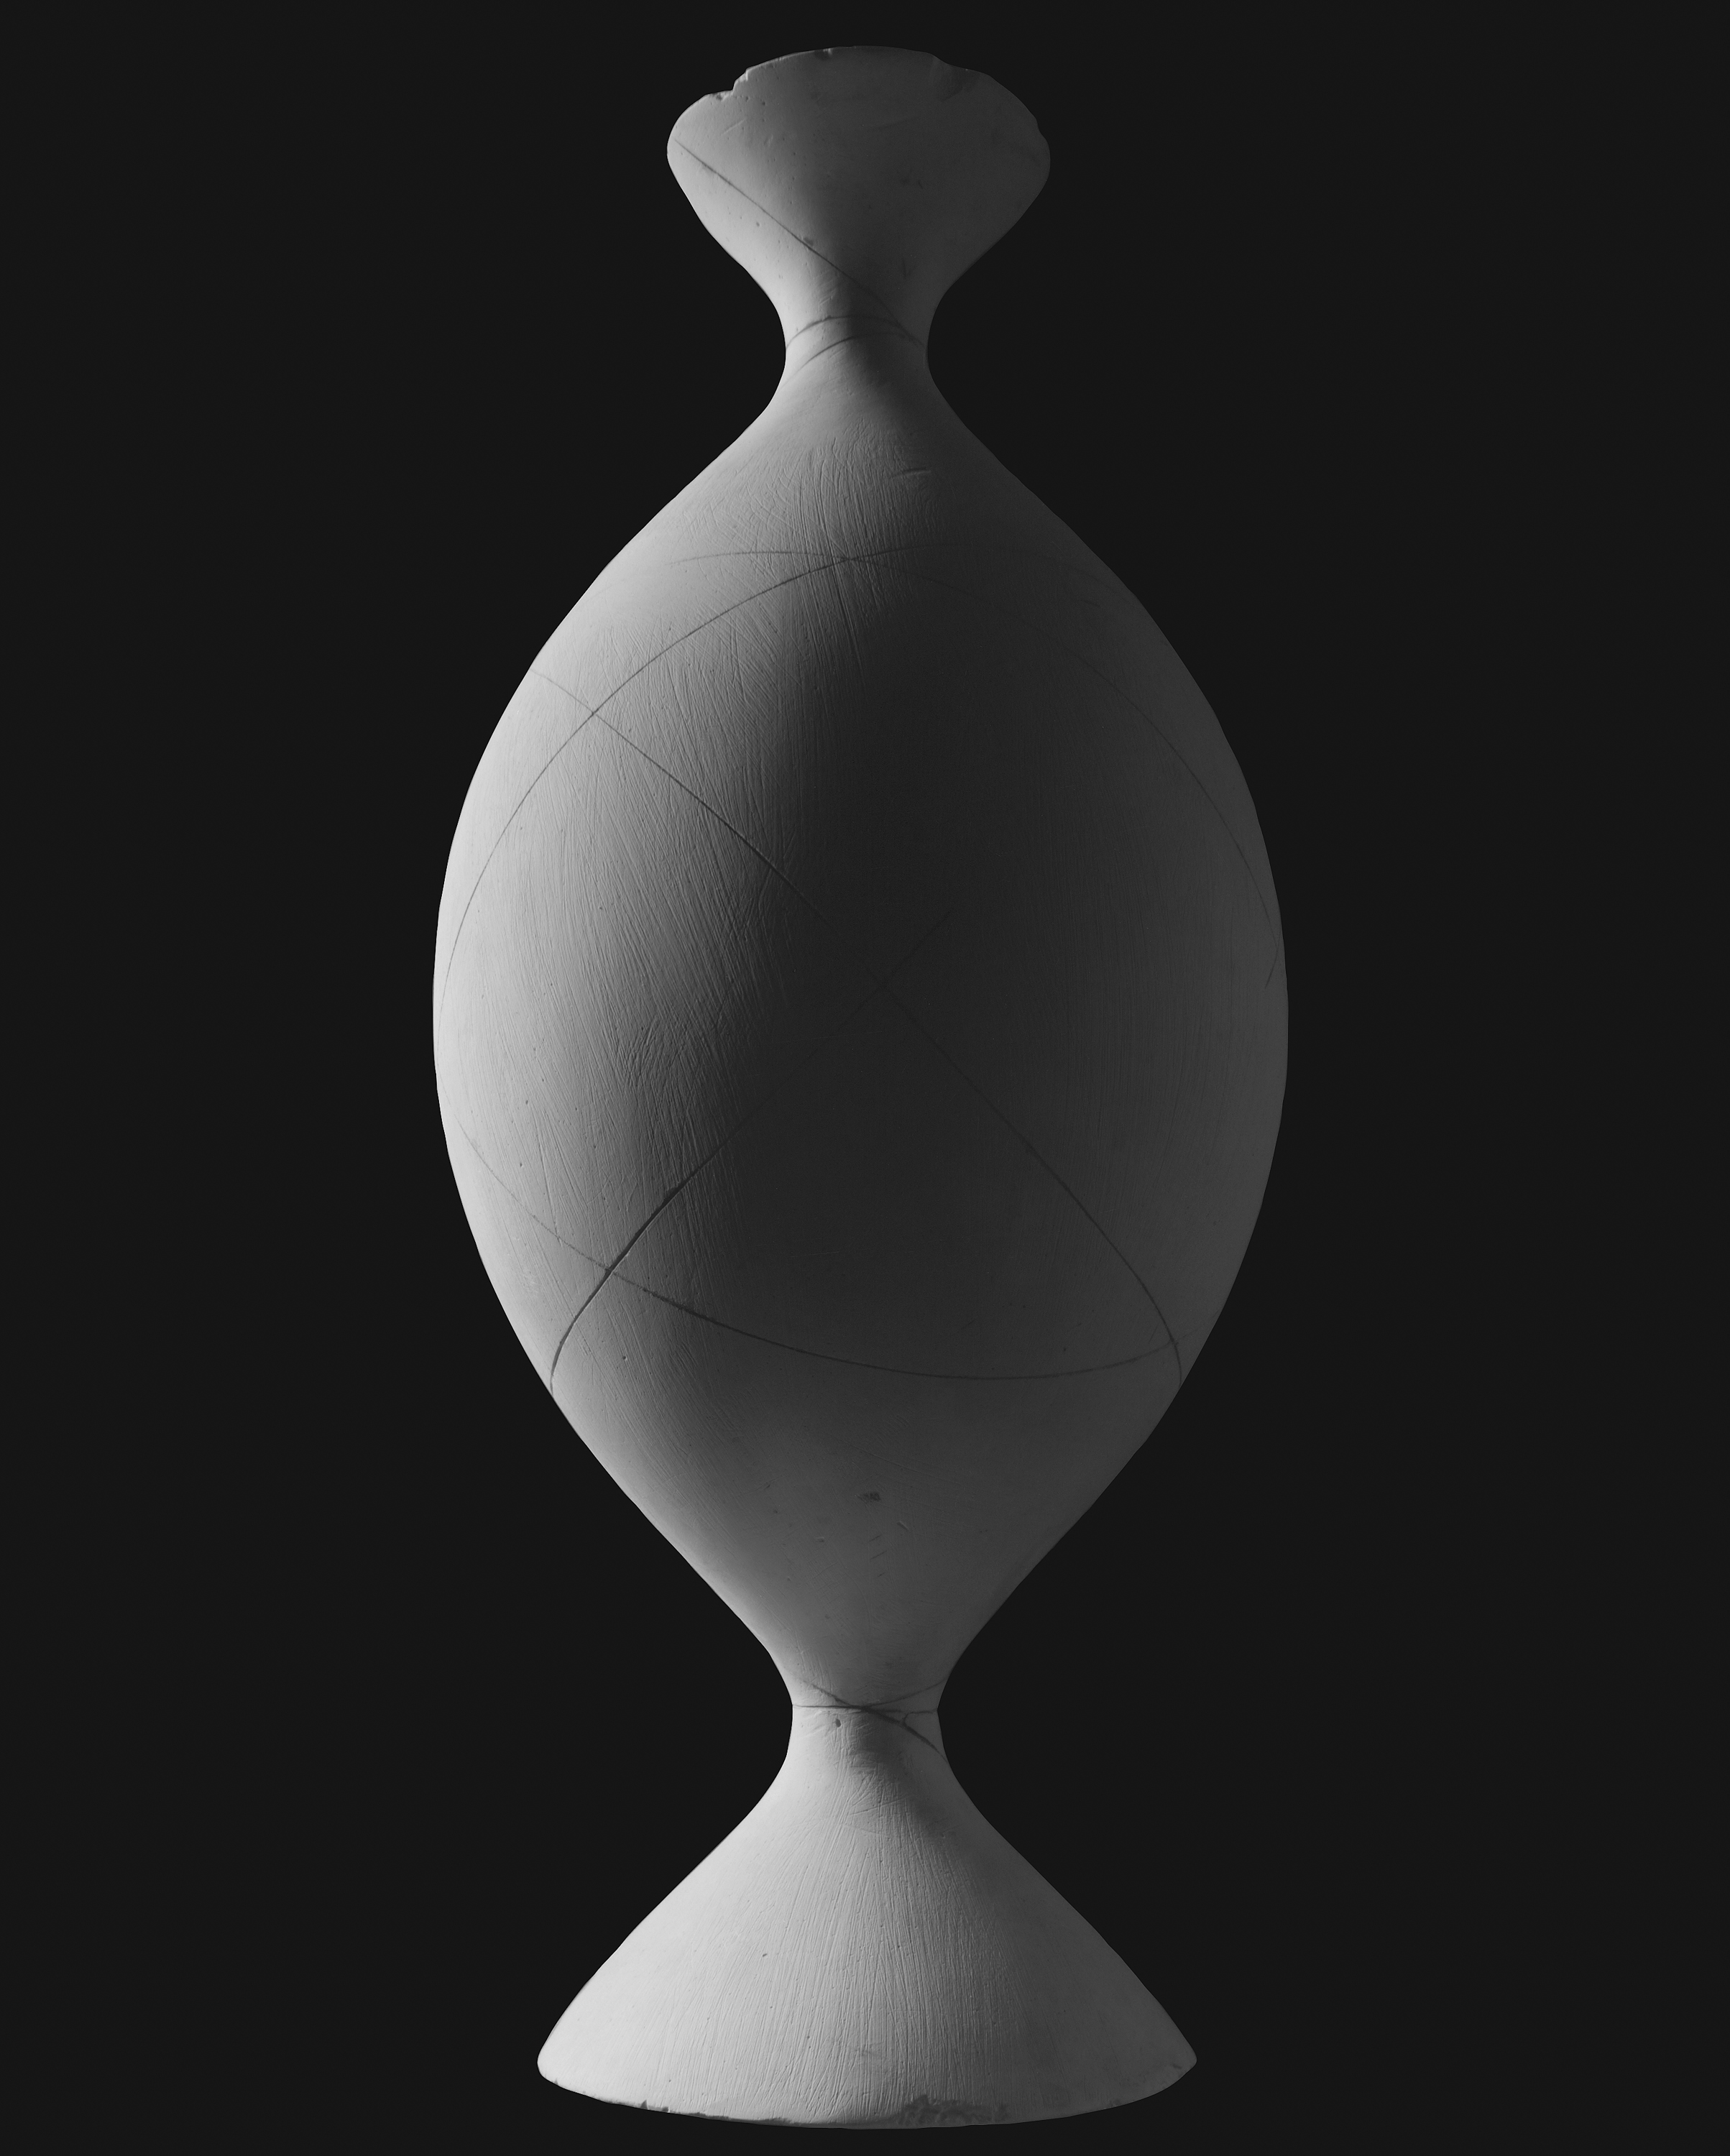 Black and white photograph of an hourglass shaped form with black background